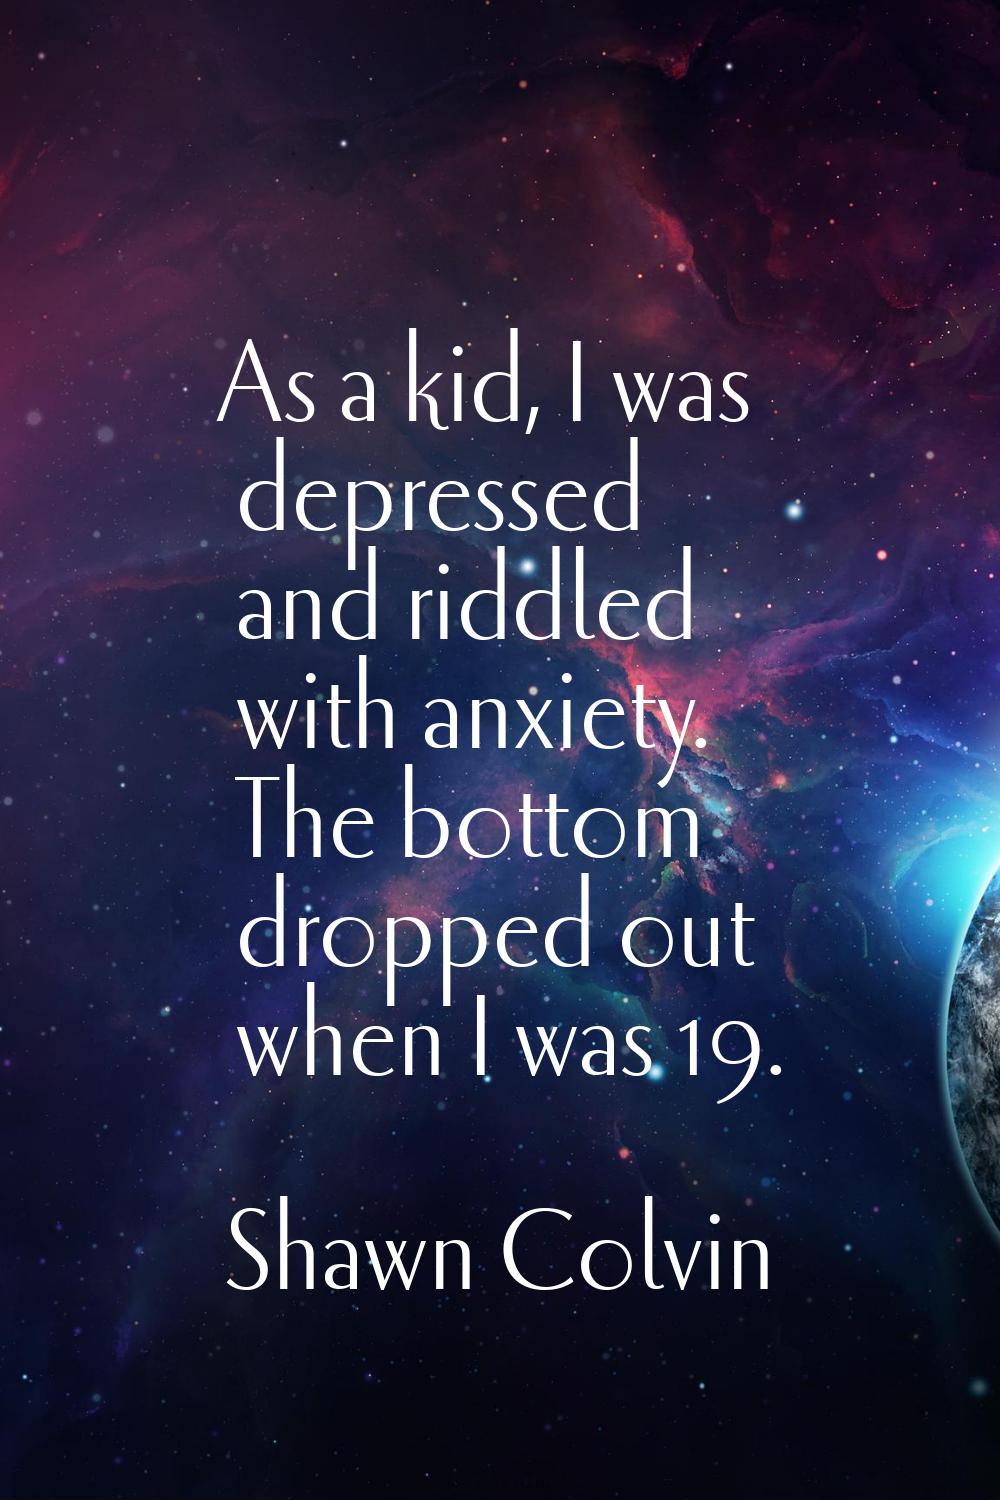 As a kid, I was depressed and riddled with anxiety. The bottom dropped out when I was 19.